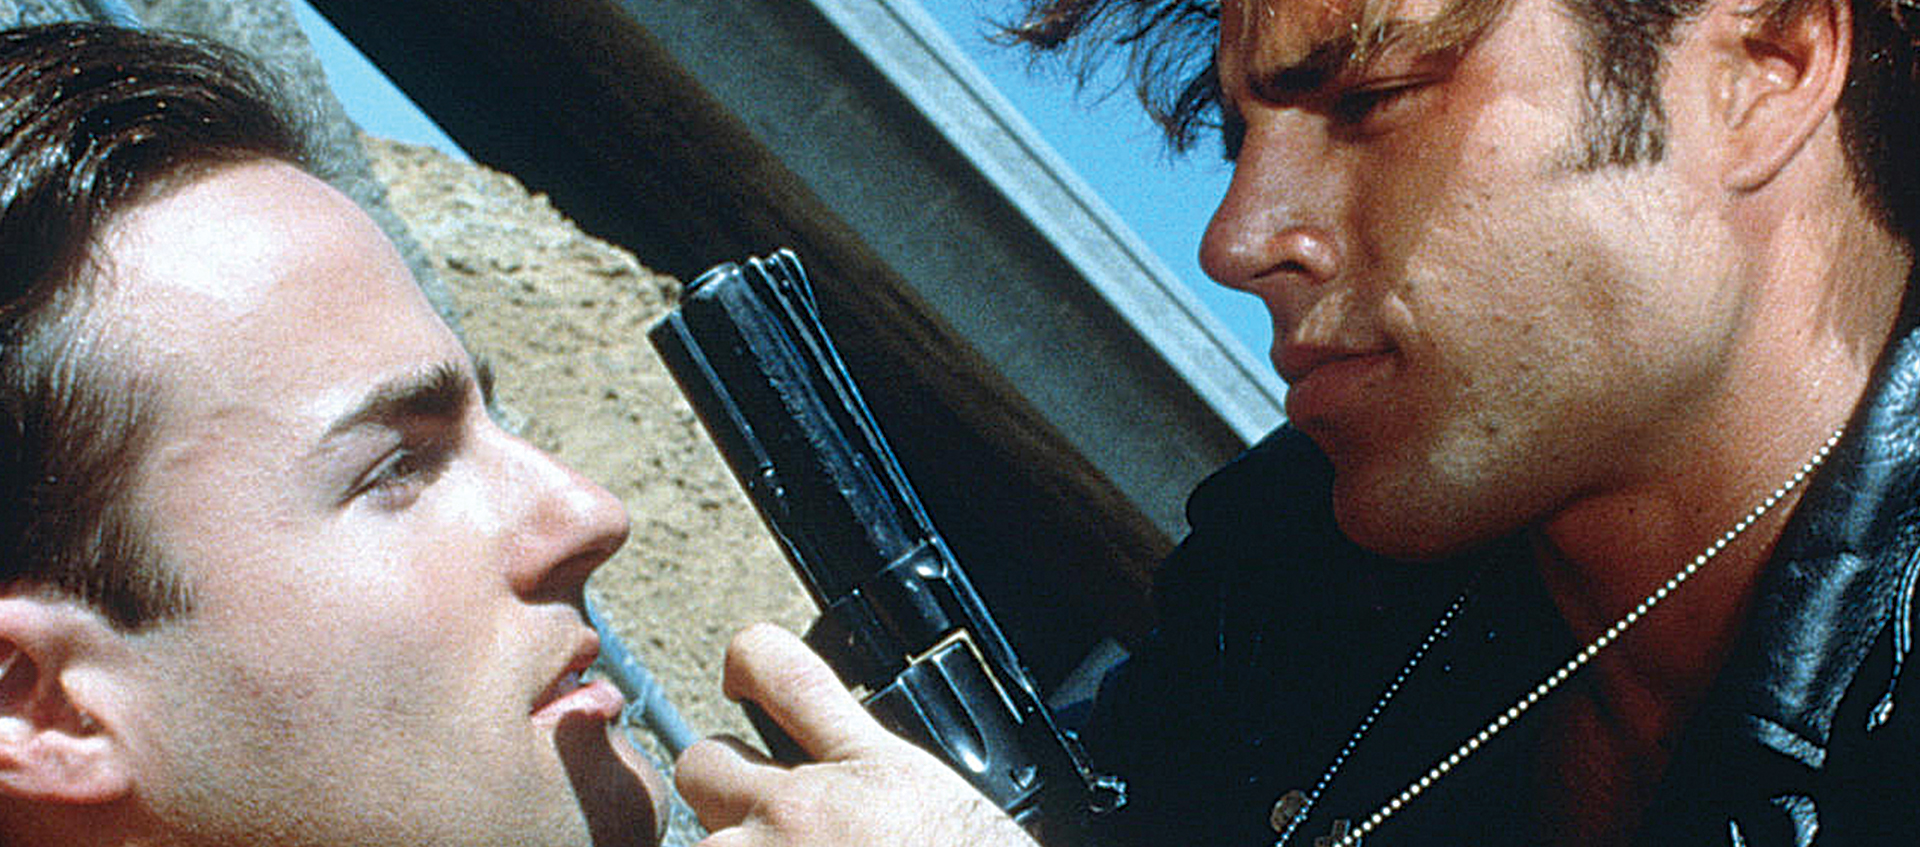 Actor Mike Dytri as Luke brandishes a gun in front of Craig Gilmore, playing Jon, in a scene from Gregg Araki's groundbreaking 1992 LGBTQ film The Living End